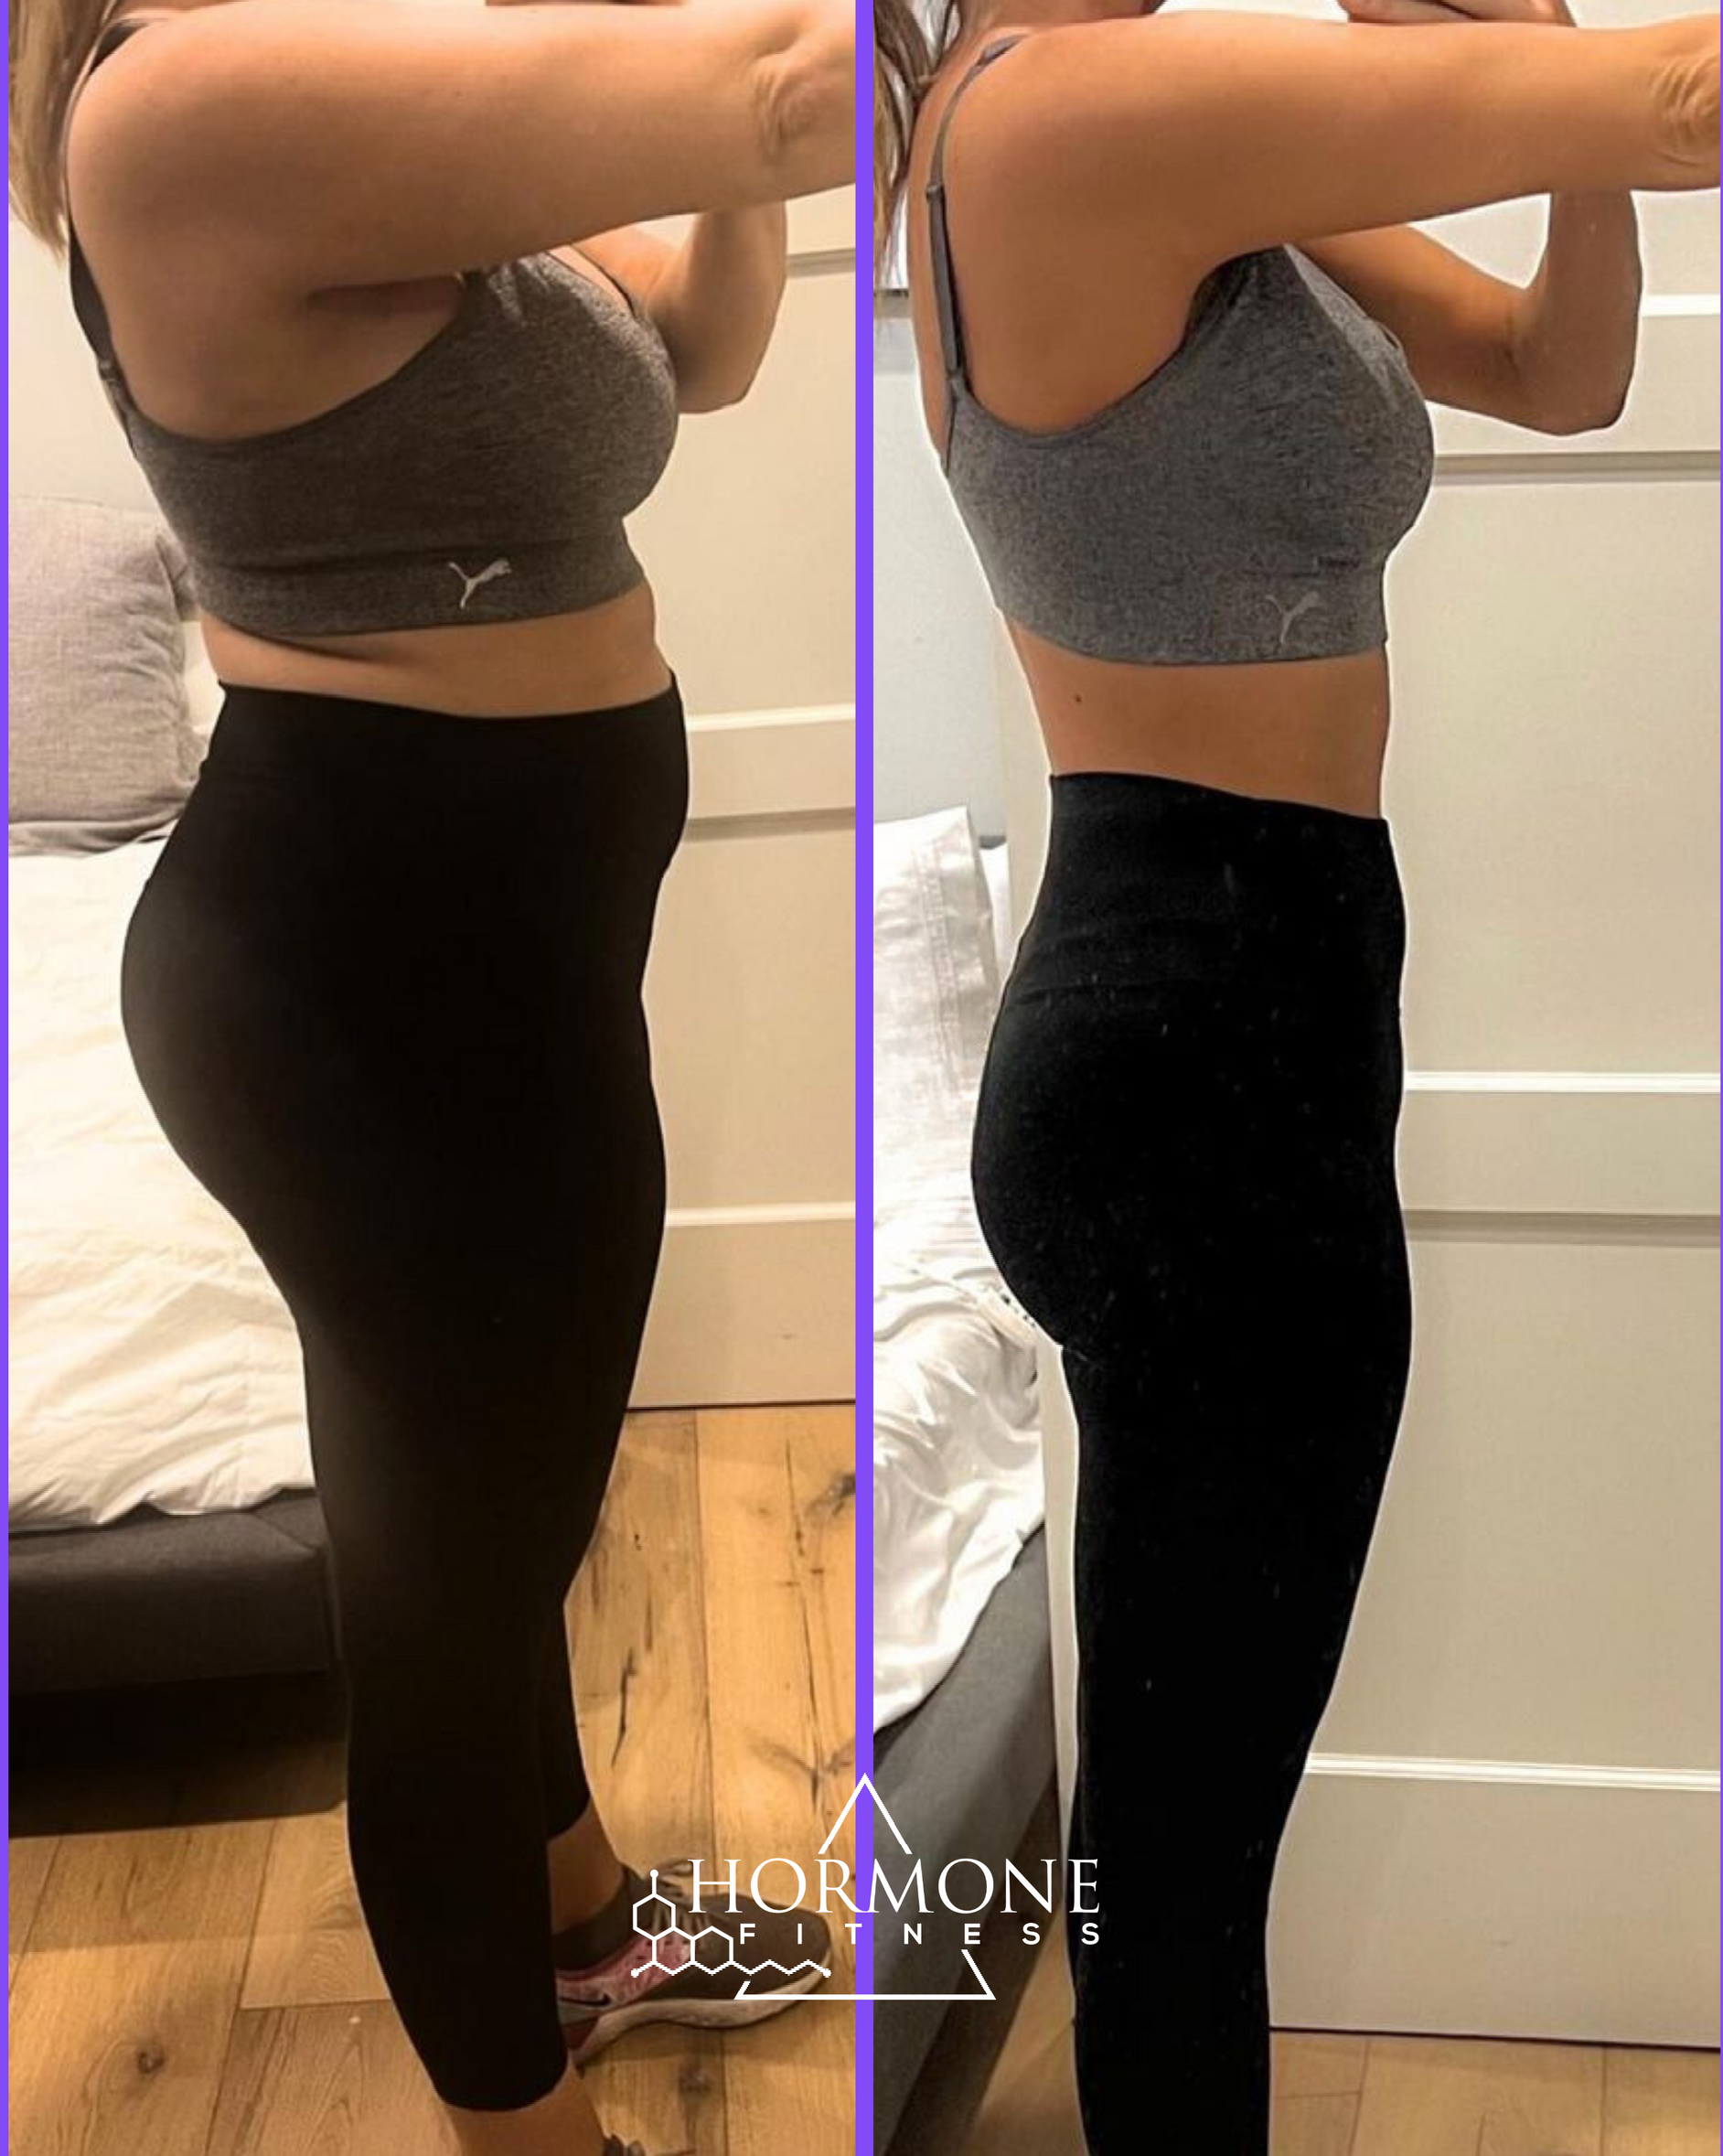 A before and after weight loss transformation from a side angle of a woman 's lower body 